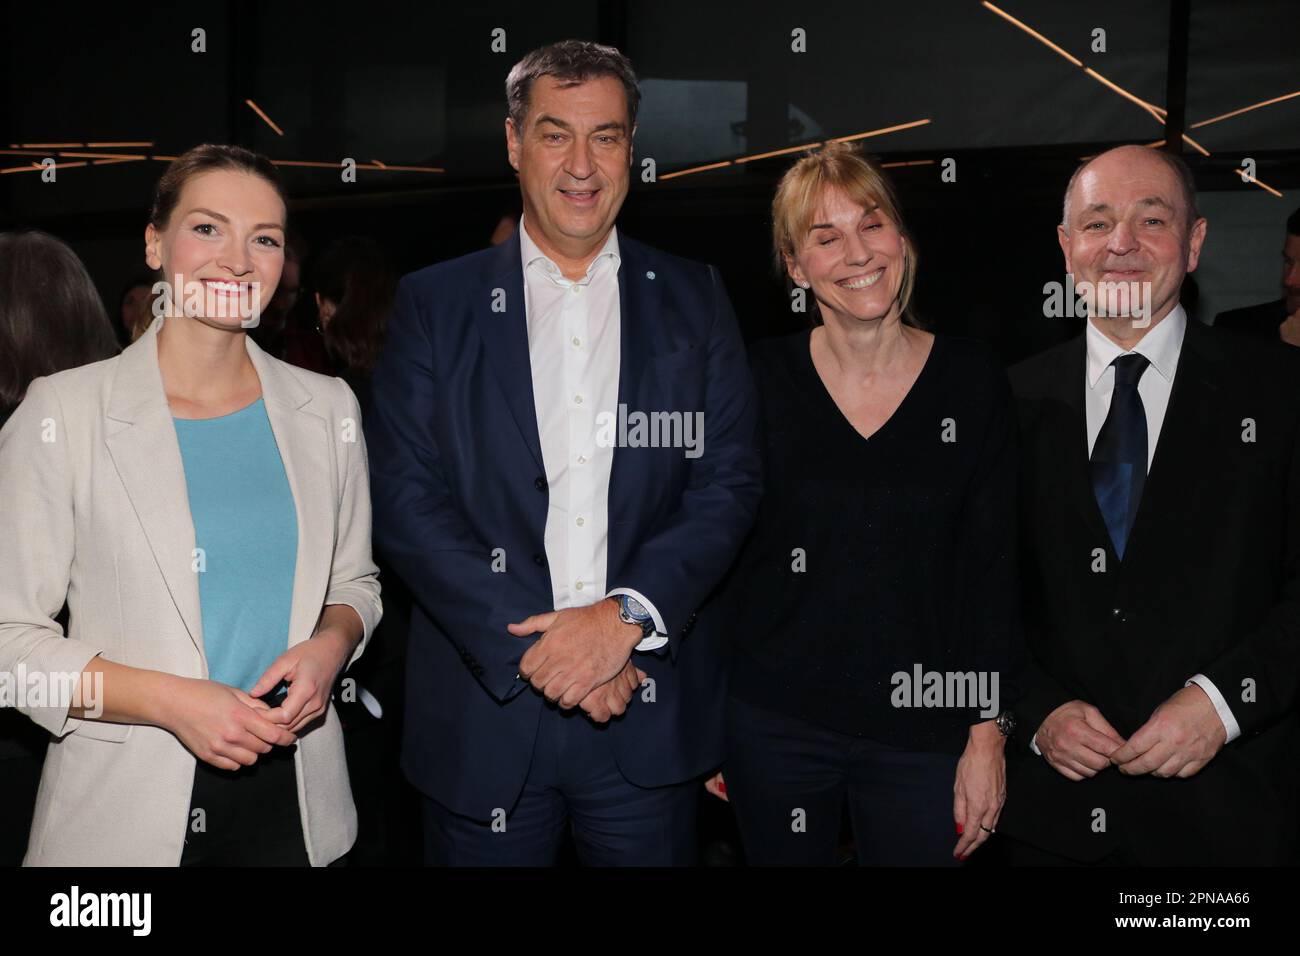 Munich, Germany, 17. April 2023; Judith GERLACH, Minister of State for digital development and Dr. Markus SOEDER, SÖDER, Bayerischer Ministerpräsident, German politician serving as Minister-President of Bavaria since 2018 and Leader of the Christian Social Union in Bavaria (CSU), Johanna PFEIFFER, Vice President of the Walt Disney Company Germany and Dieter SEMMELMANN, CEO of SEMMEL Exhibitions (L-R) seen during the VIP Opening at the DISNEY 100 Exhibition entertainment event held at the small Olympia hall in Munich Germany on 17. April 2023. picture and copyright Arthur THILL/ATP images (T Stock Photo